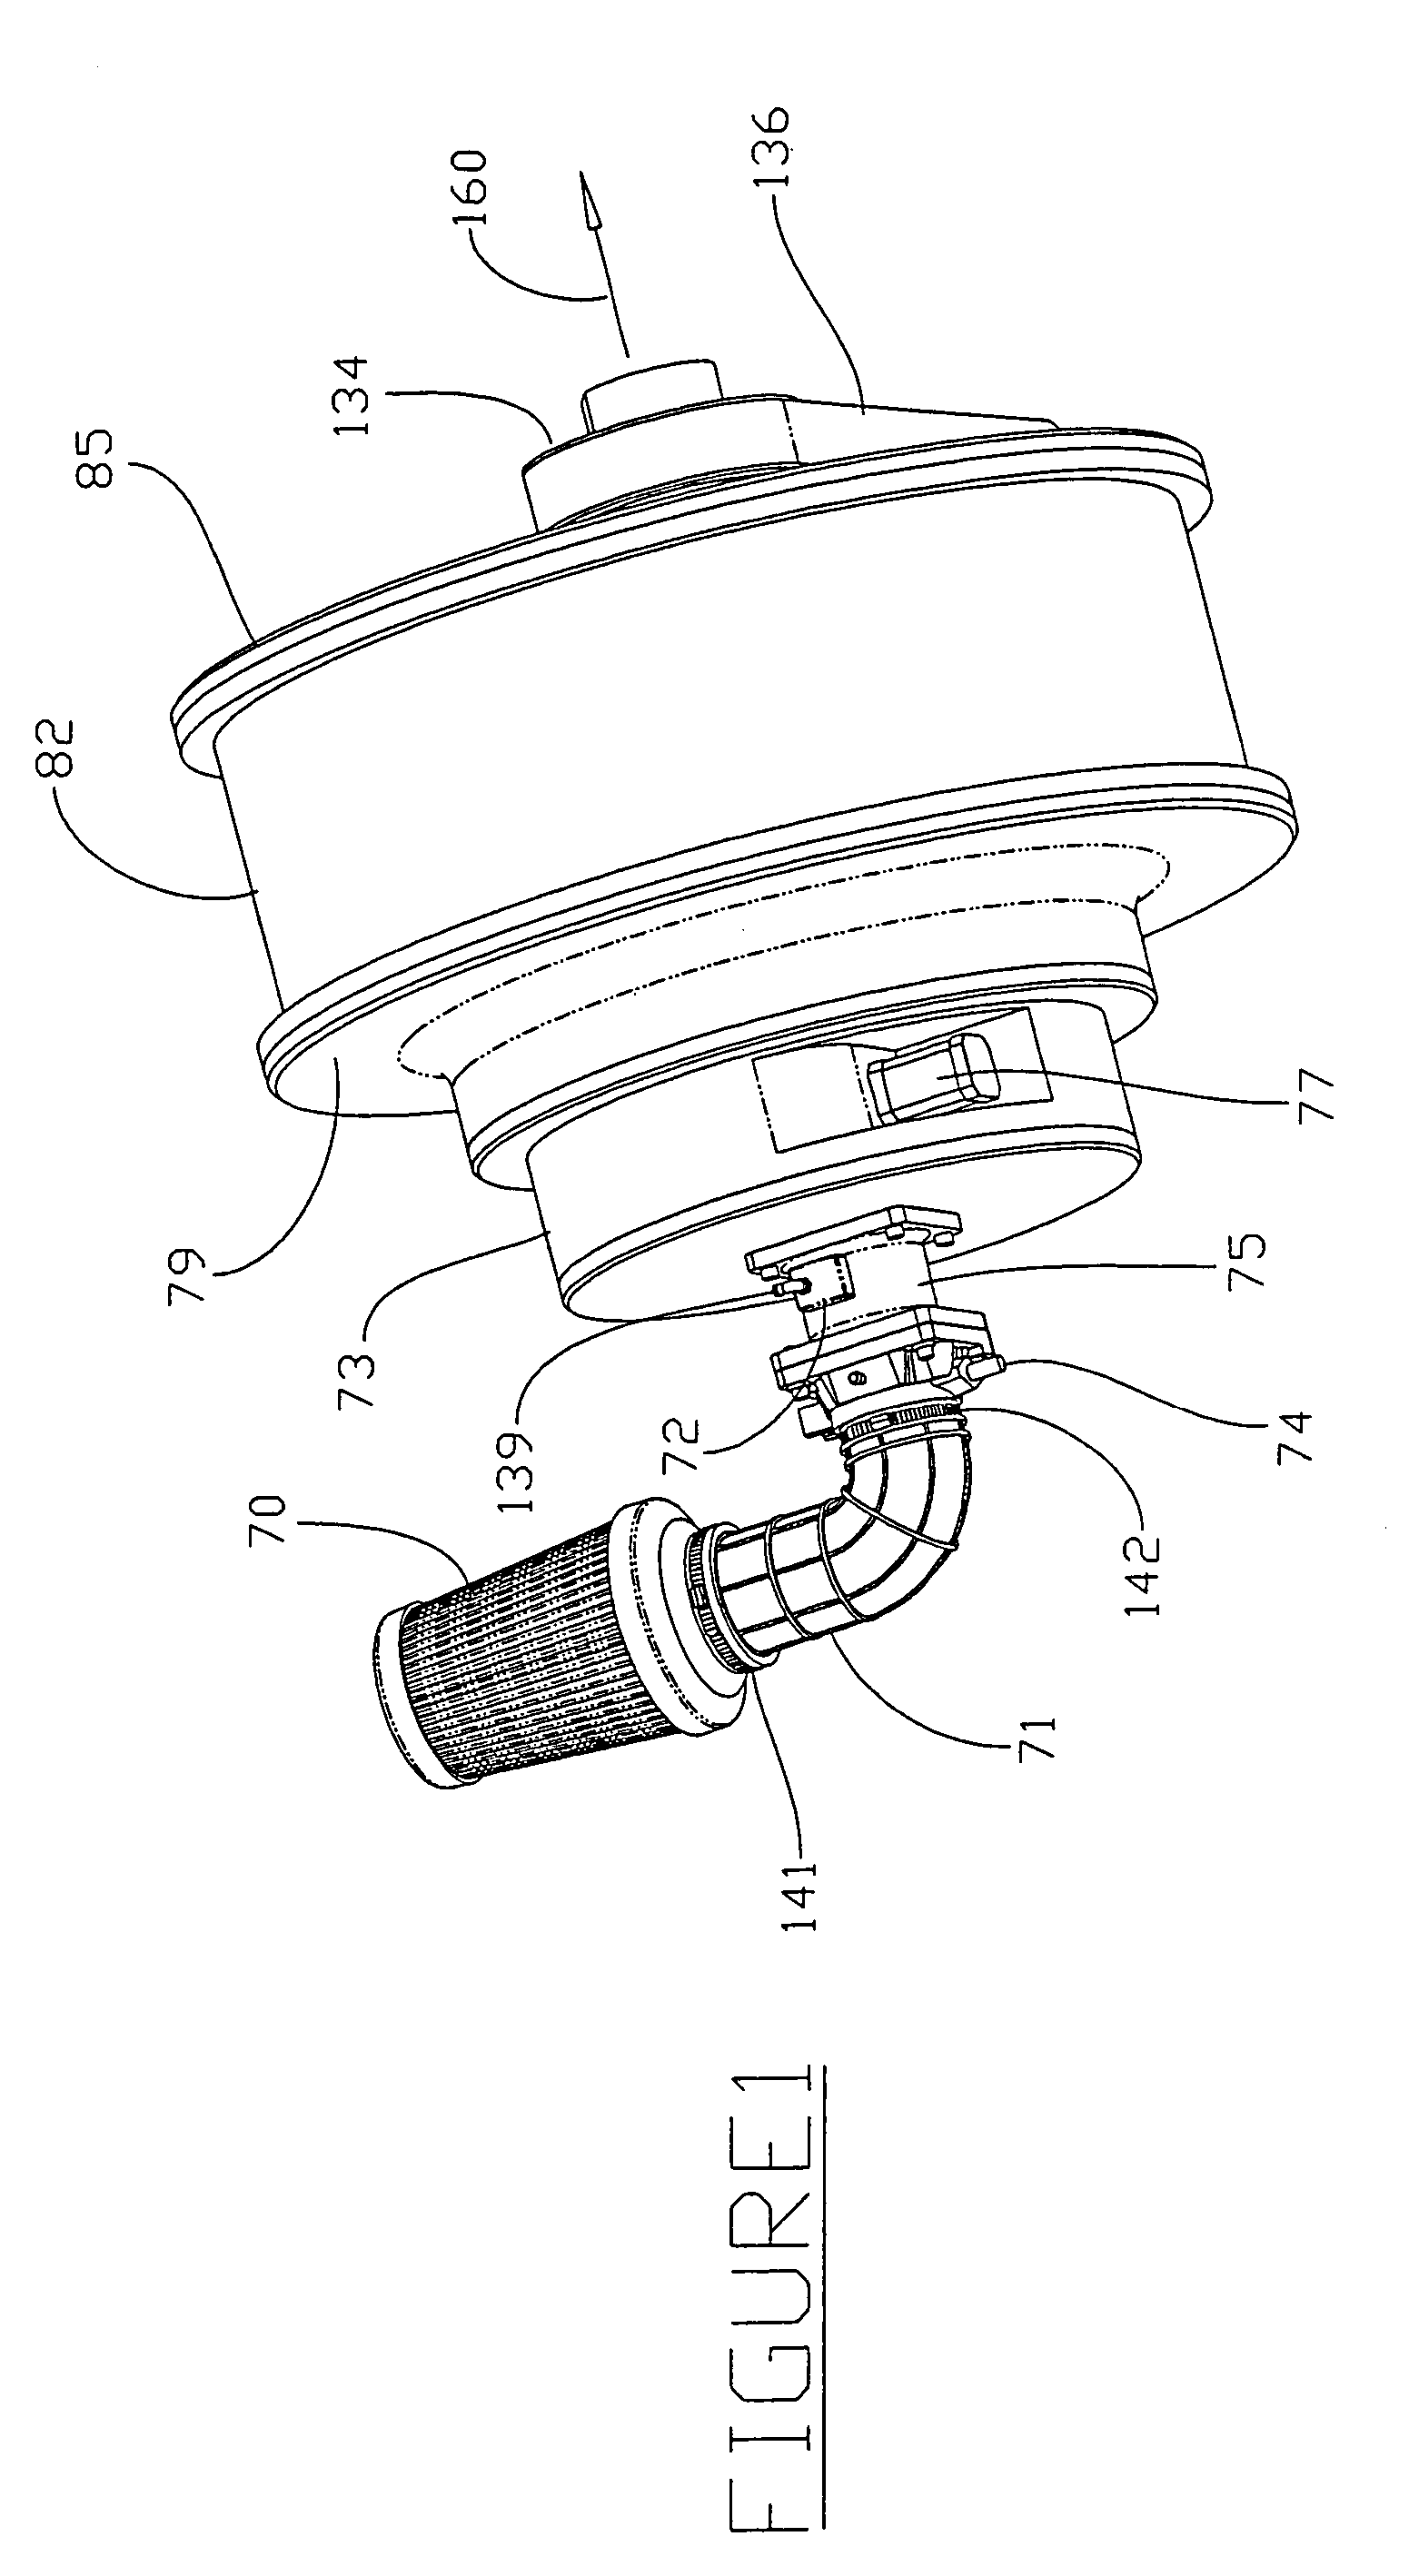 Method of processing waste product into fuel